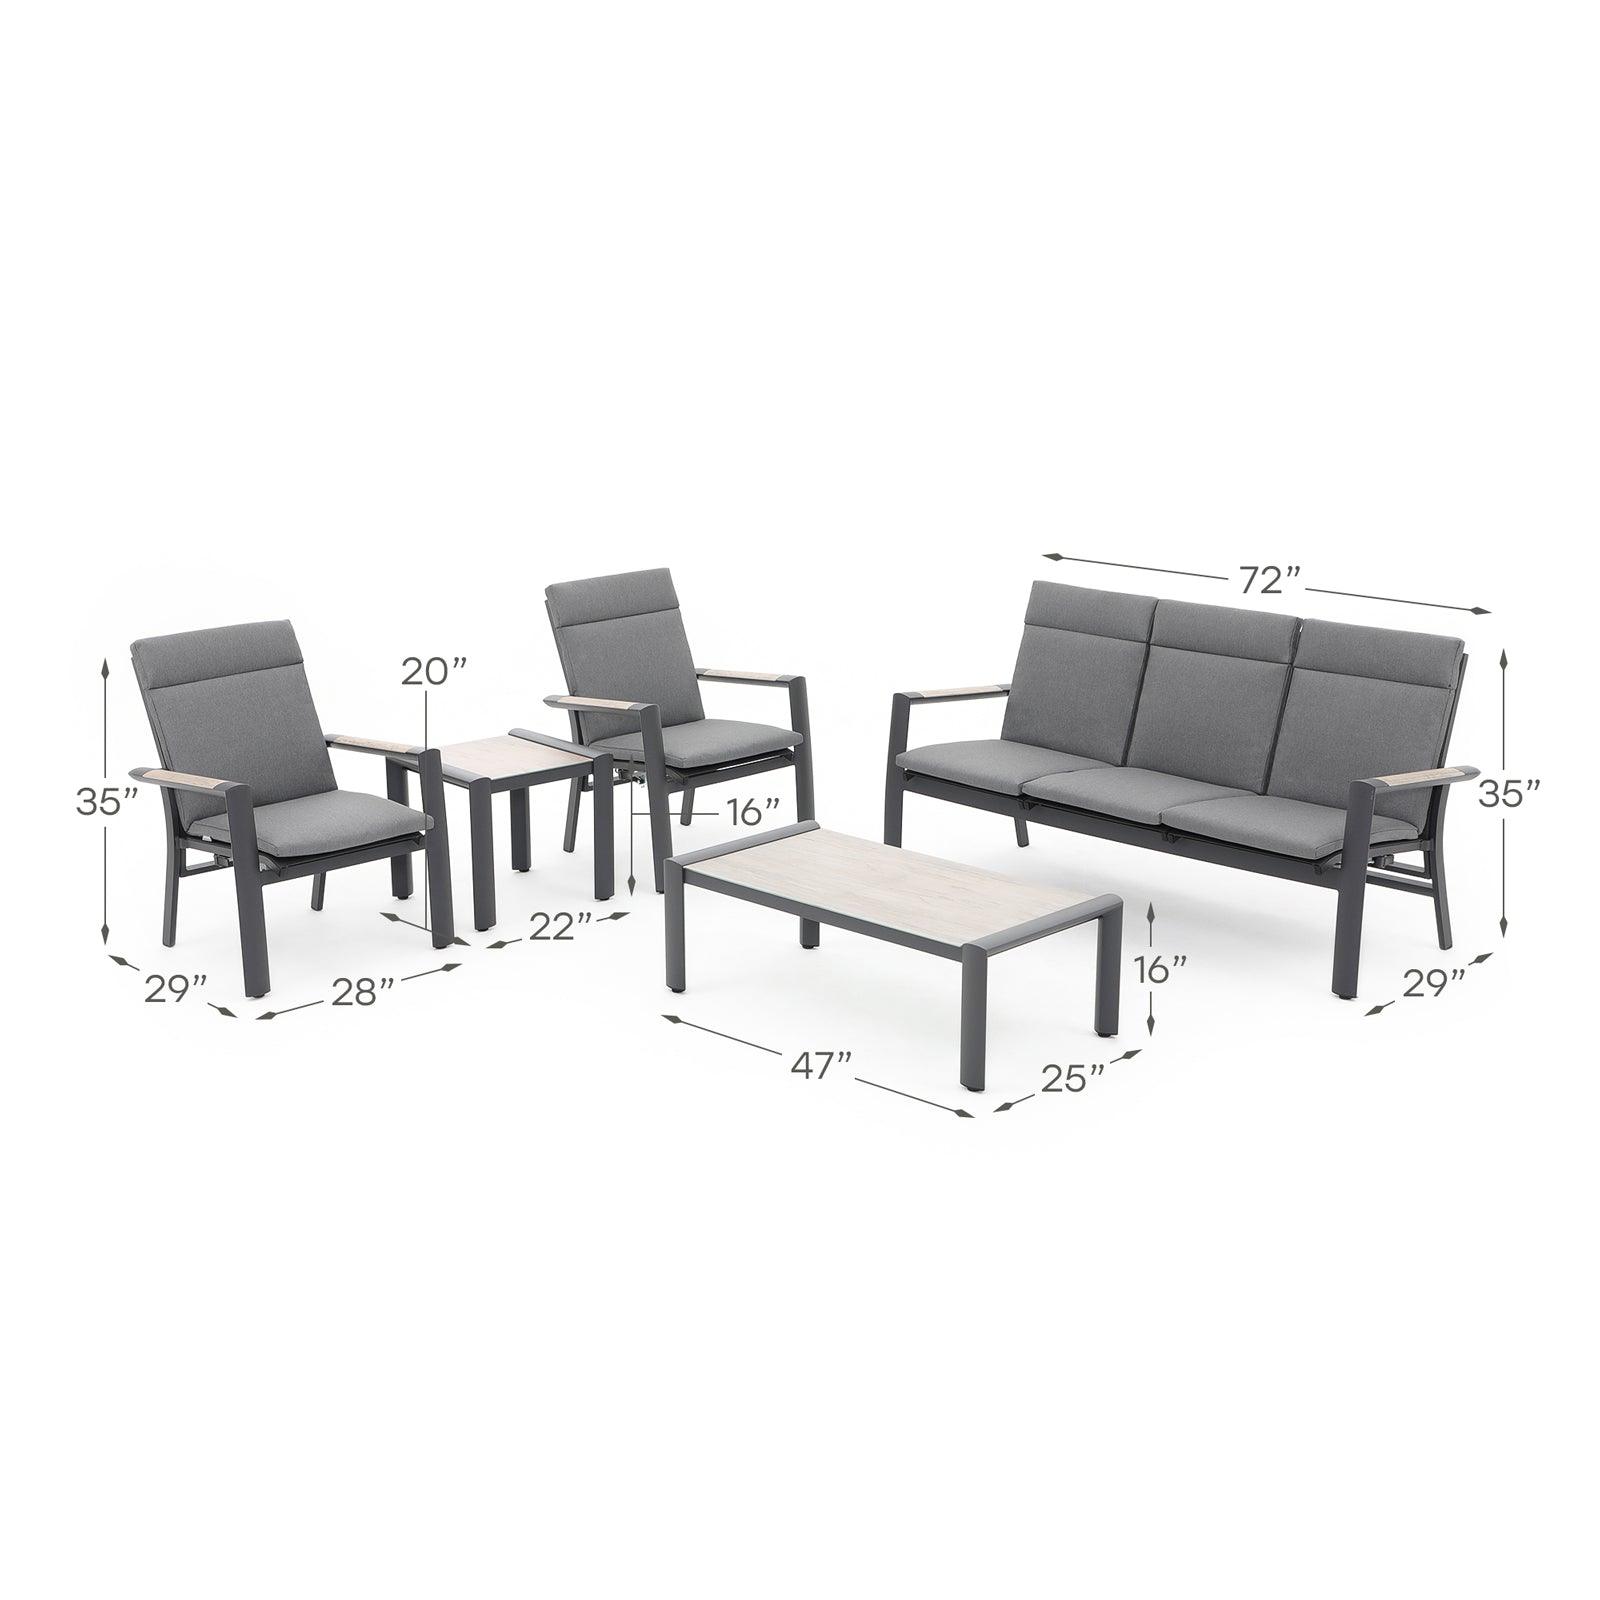 Capri 5-Piece grey aluminum outdoor conversation set with grey cushions, 1 three-seater sofa with adjustable backrest, 2 armchairs with adjustable backrest, 1 rectangle coffee table, 1 square side table, dimension information - Jardina Furnitur